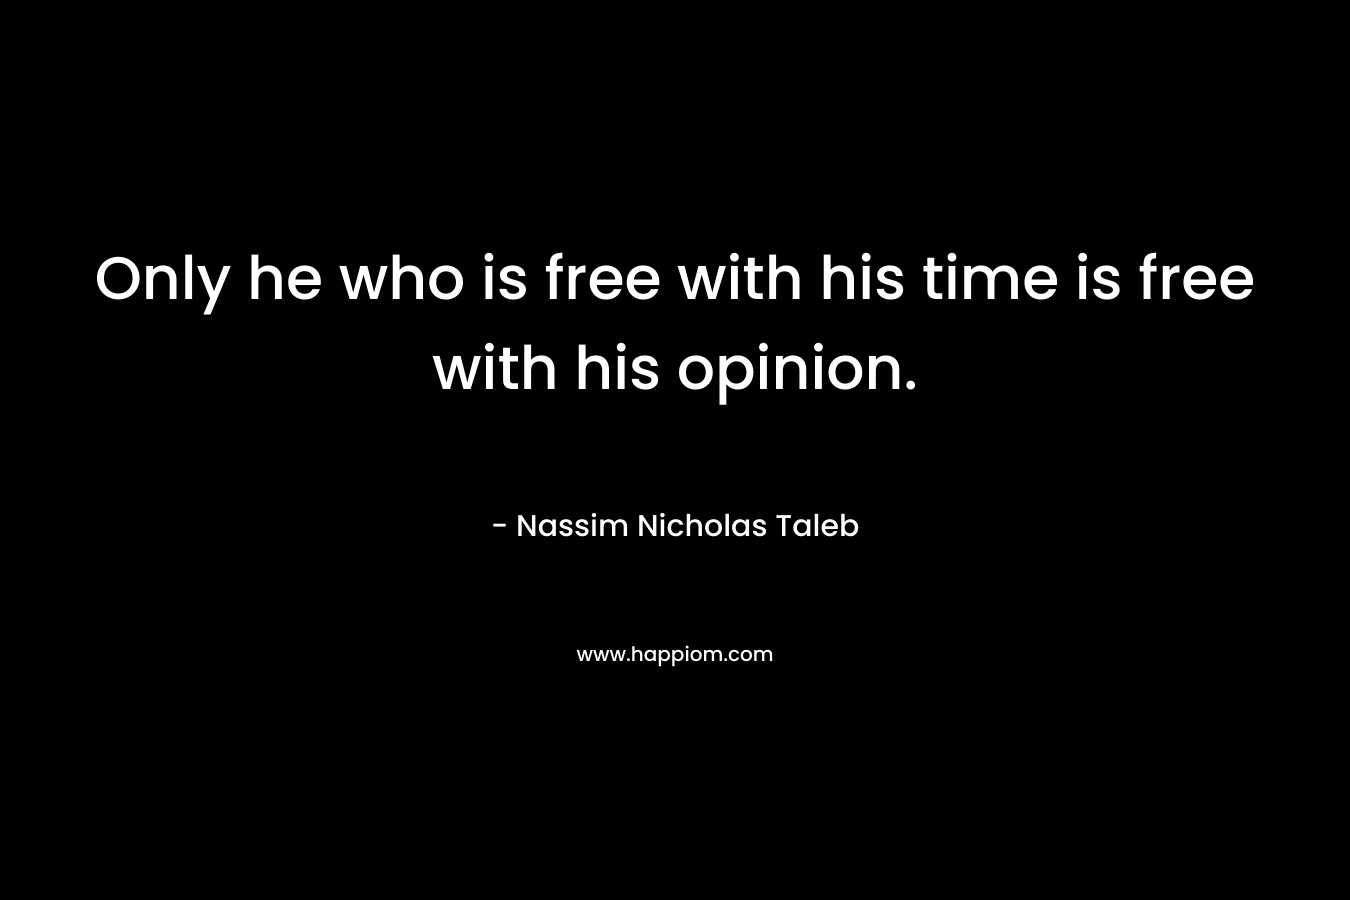 Only he who is free with his time is free with his opinion. – Nassim Nicholas Taleb